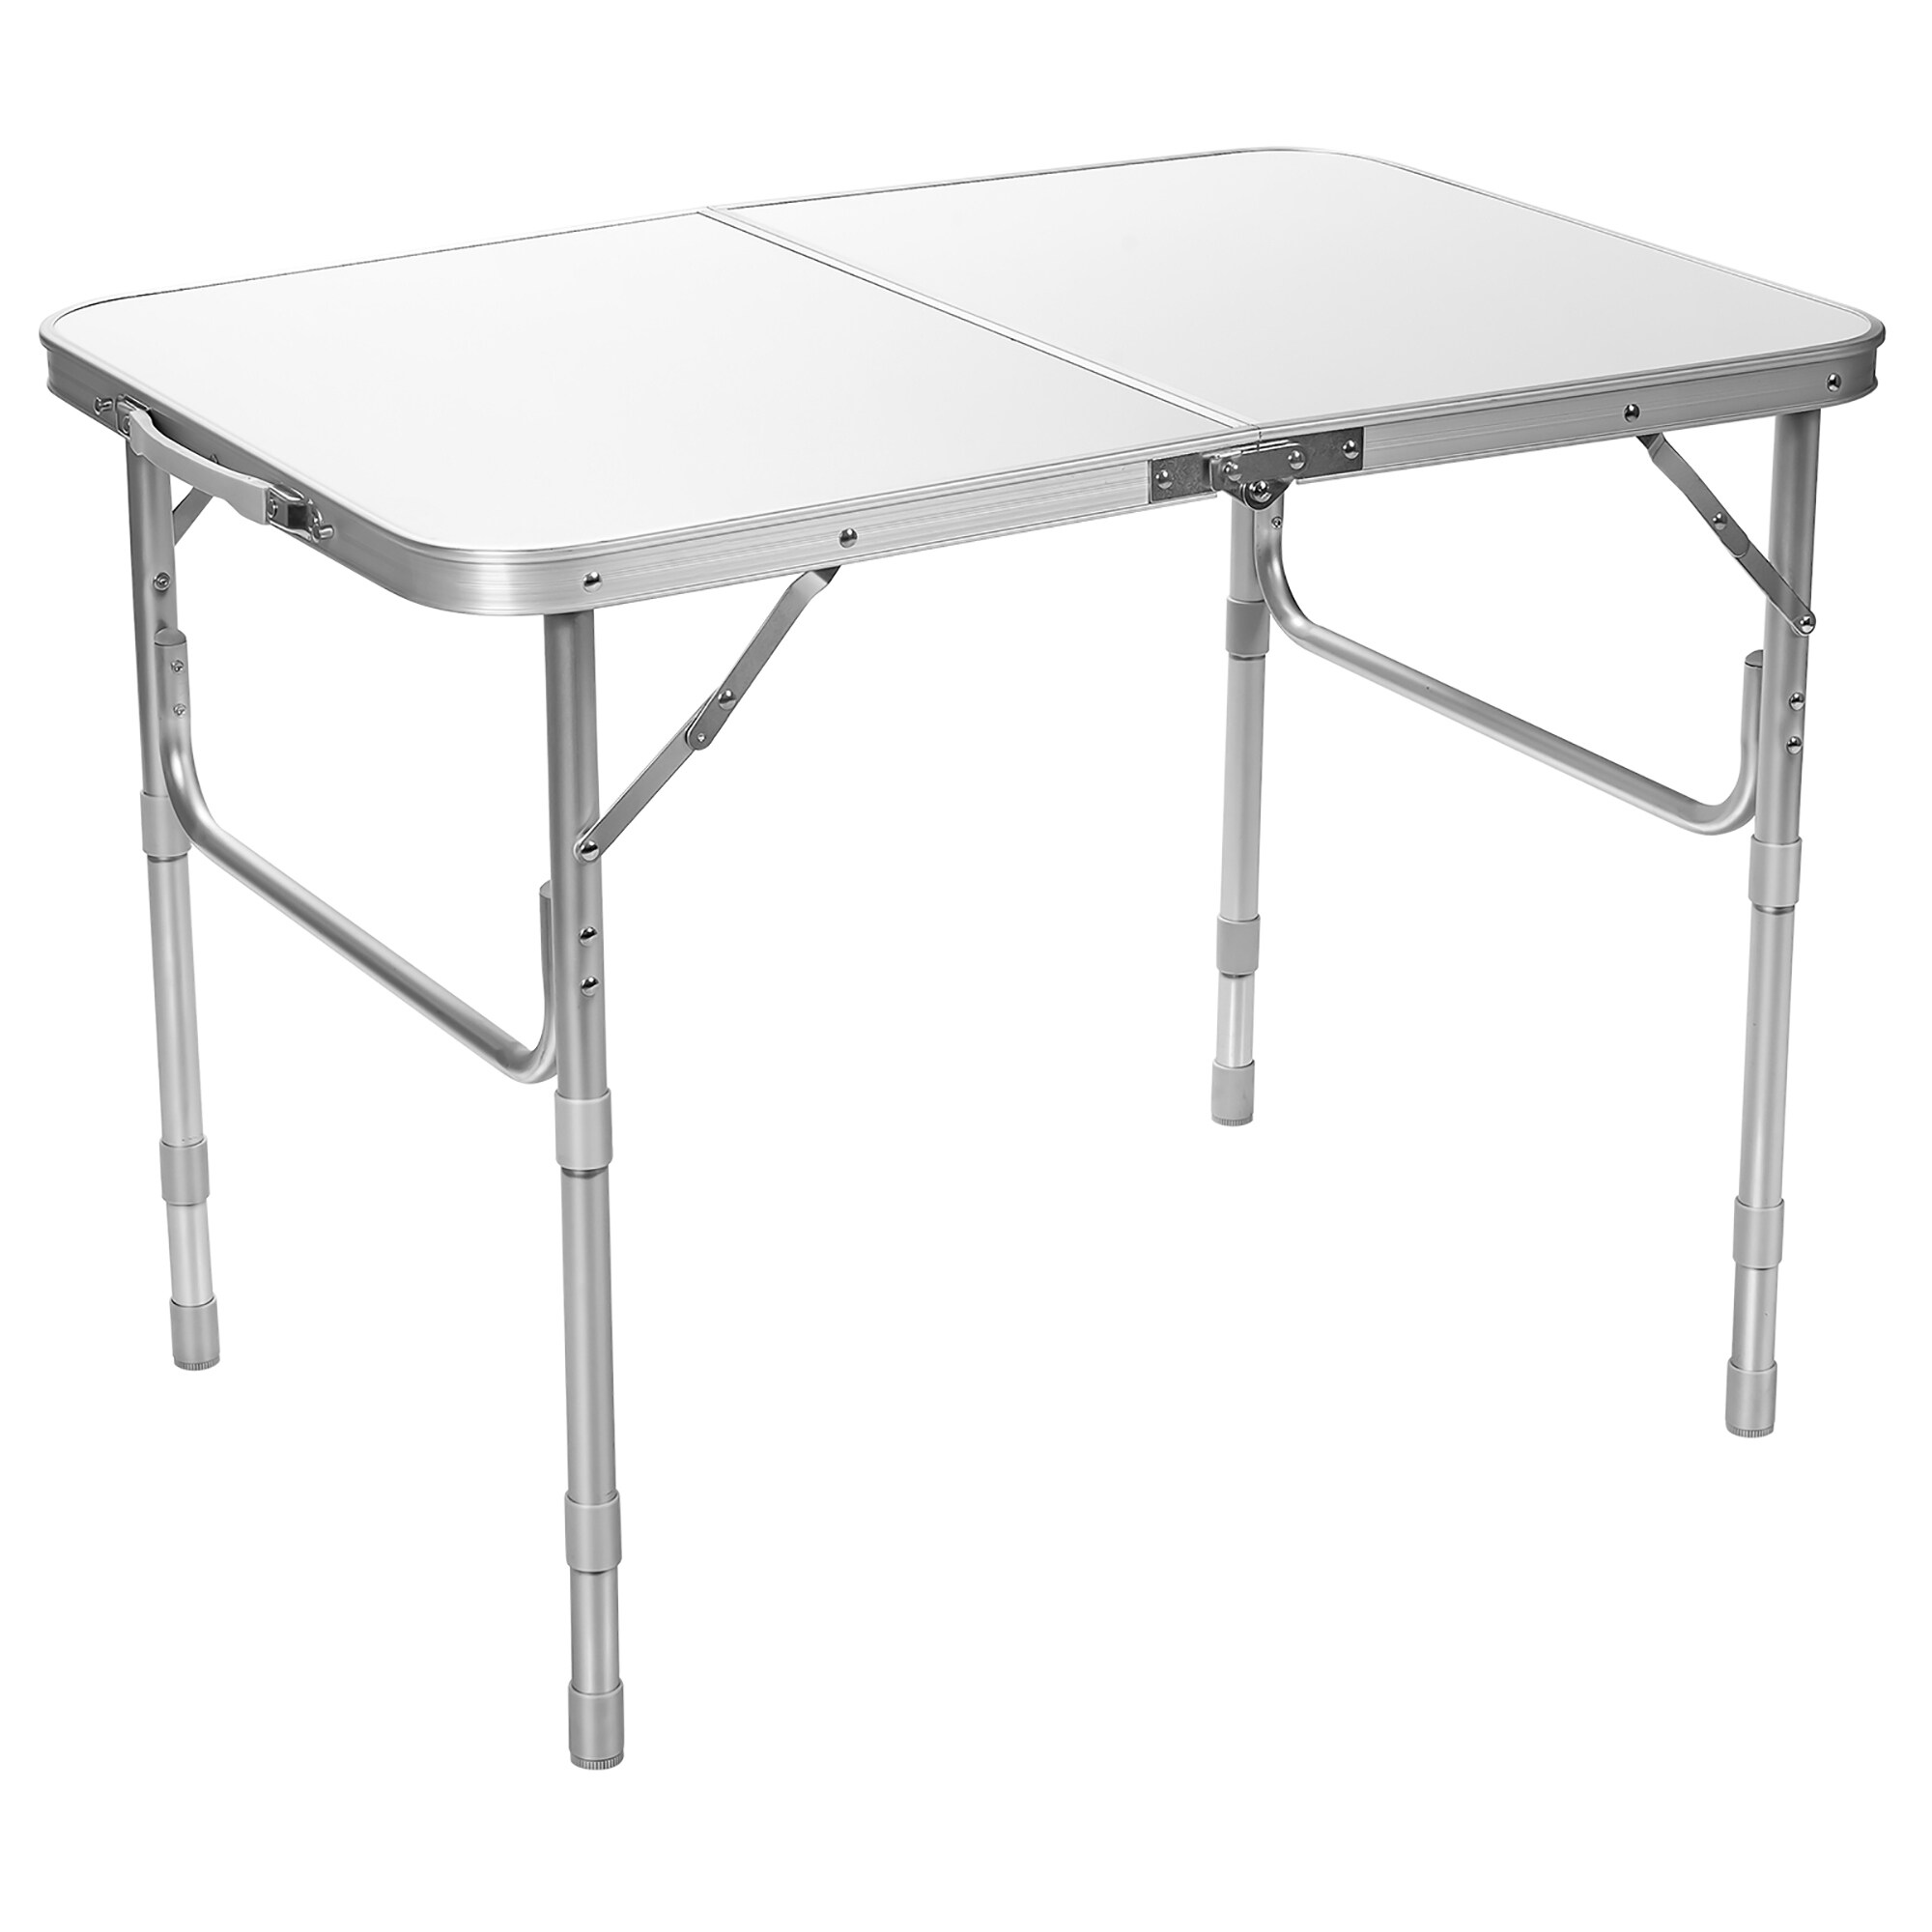 https://ak1.ostkcdn.com/images/products/is/images/direct/79739a7737c82484c2ec0bd10f9fd85779c99512/Costway-Patio-Folding-Camping-Table-Aluminum-Adjustable-Portable.jpg